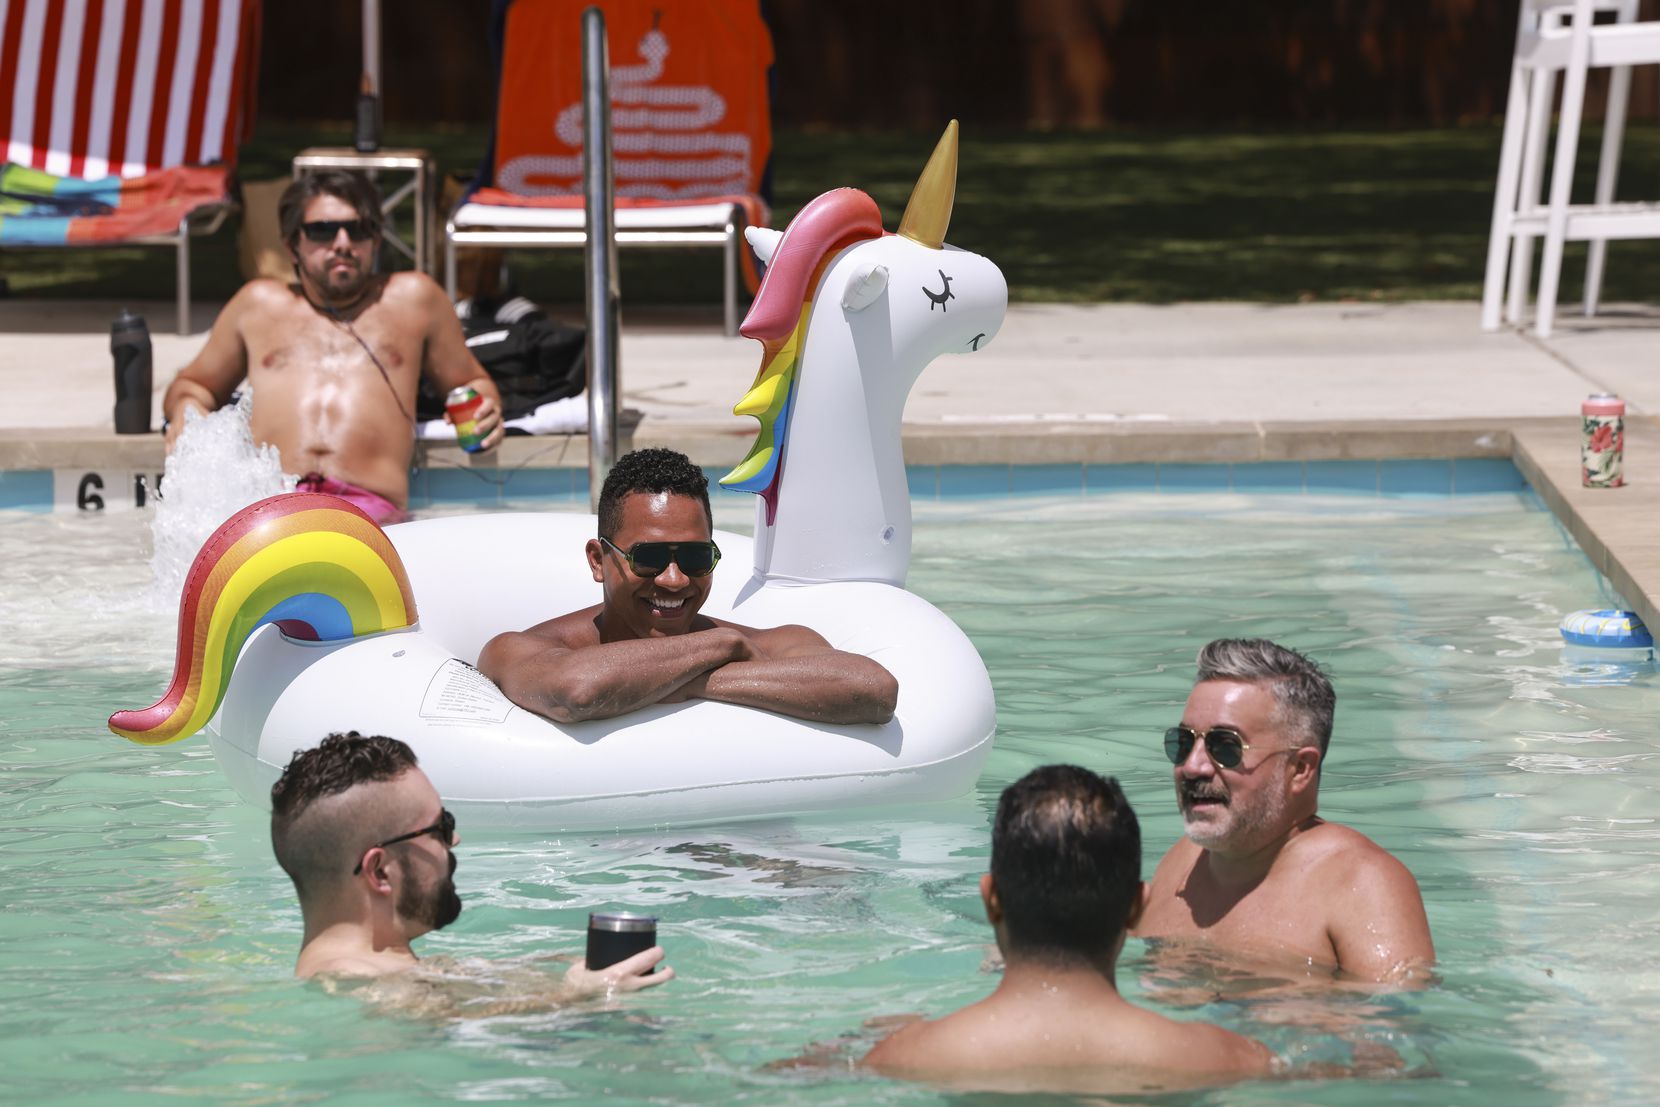 Moe MacDougall, 31, floats on a unicorn inflatable at Lee Harvey’s Dive In swimming pool. 